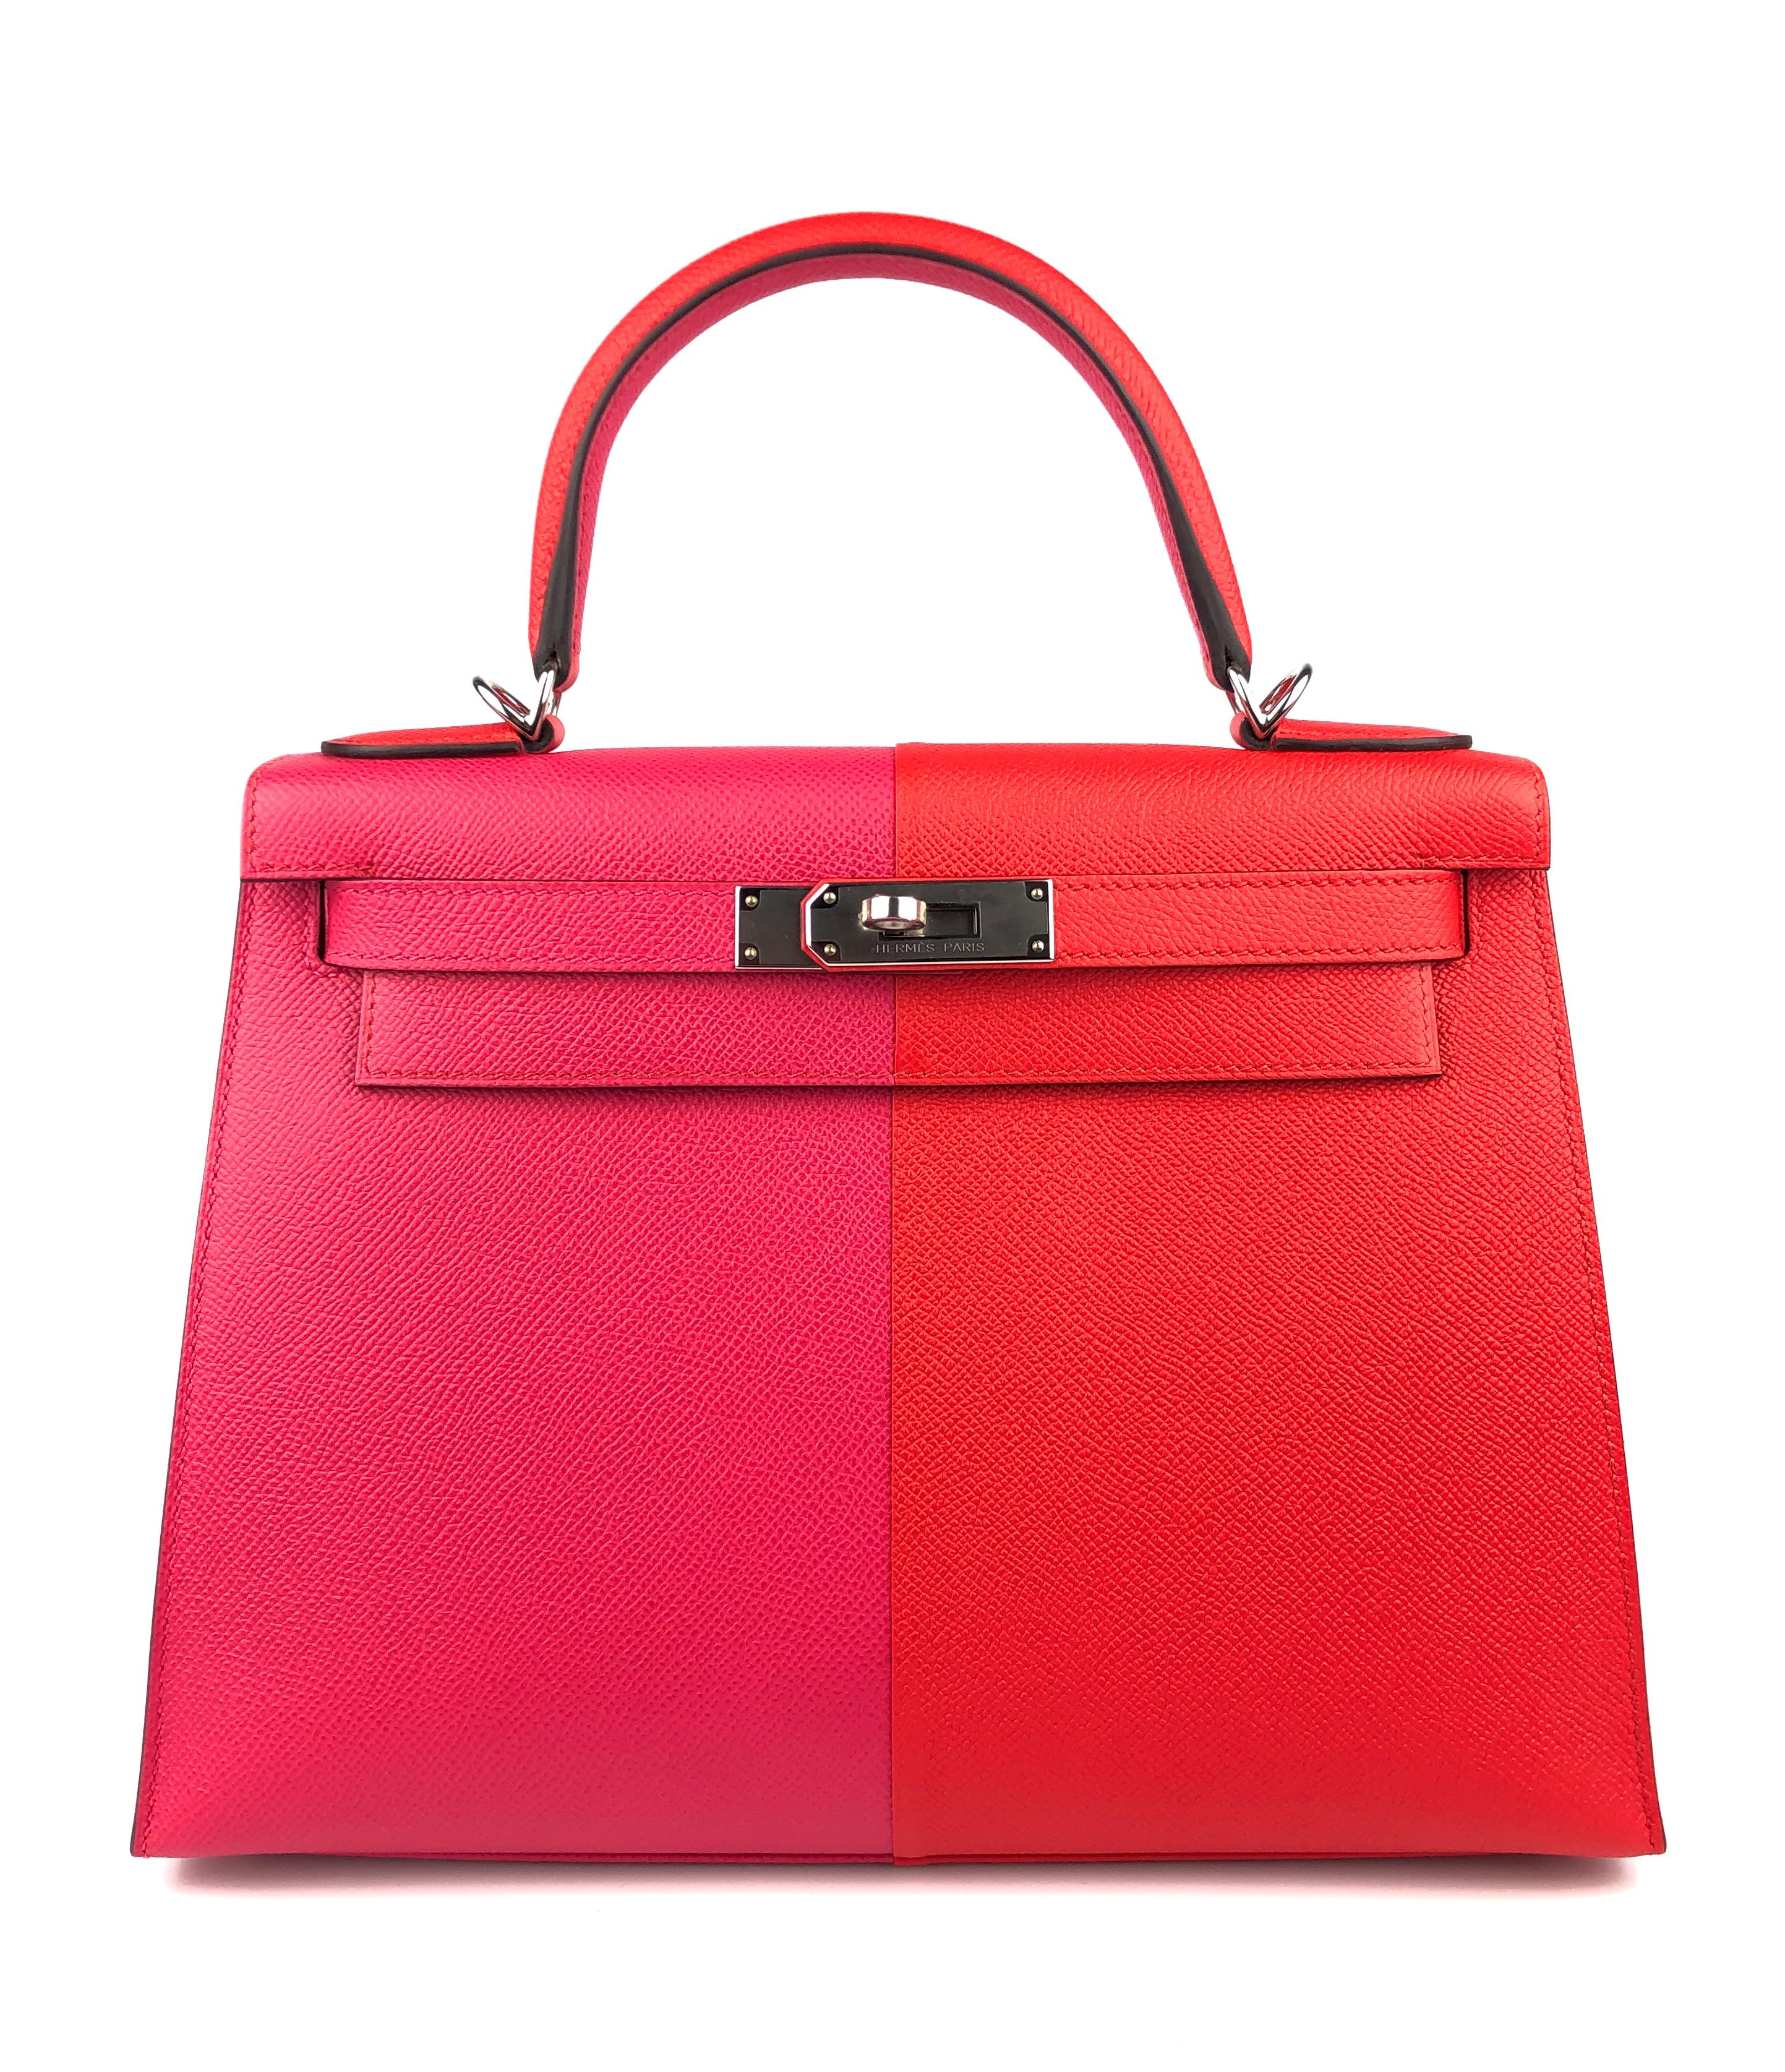 Rare New Y Stamp Hermes Kelly 28 Limited Edition Sellier Rose Extreme Rouge de Coeur Blue Zanzibar. Includes all accessories and Box.

Shop with Confidence from Lux Addicts. Authenticity Guaranteed! 
